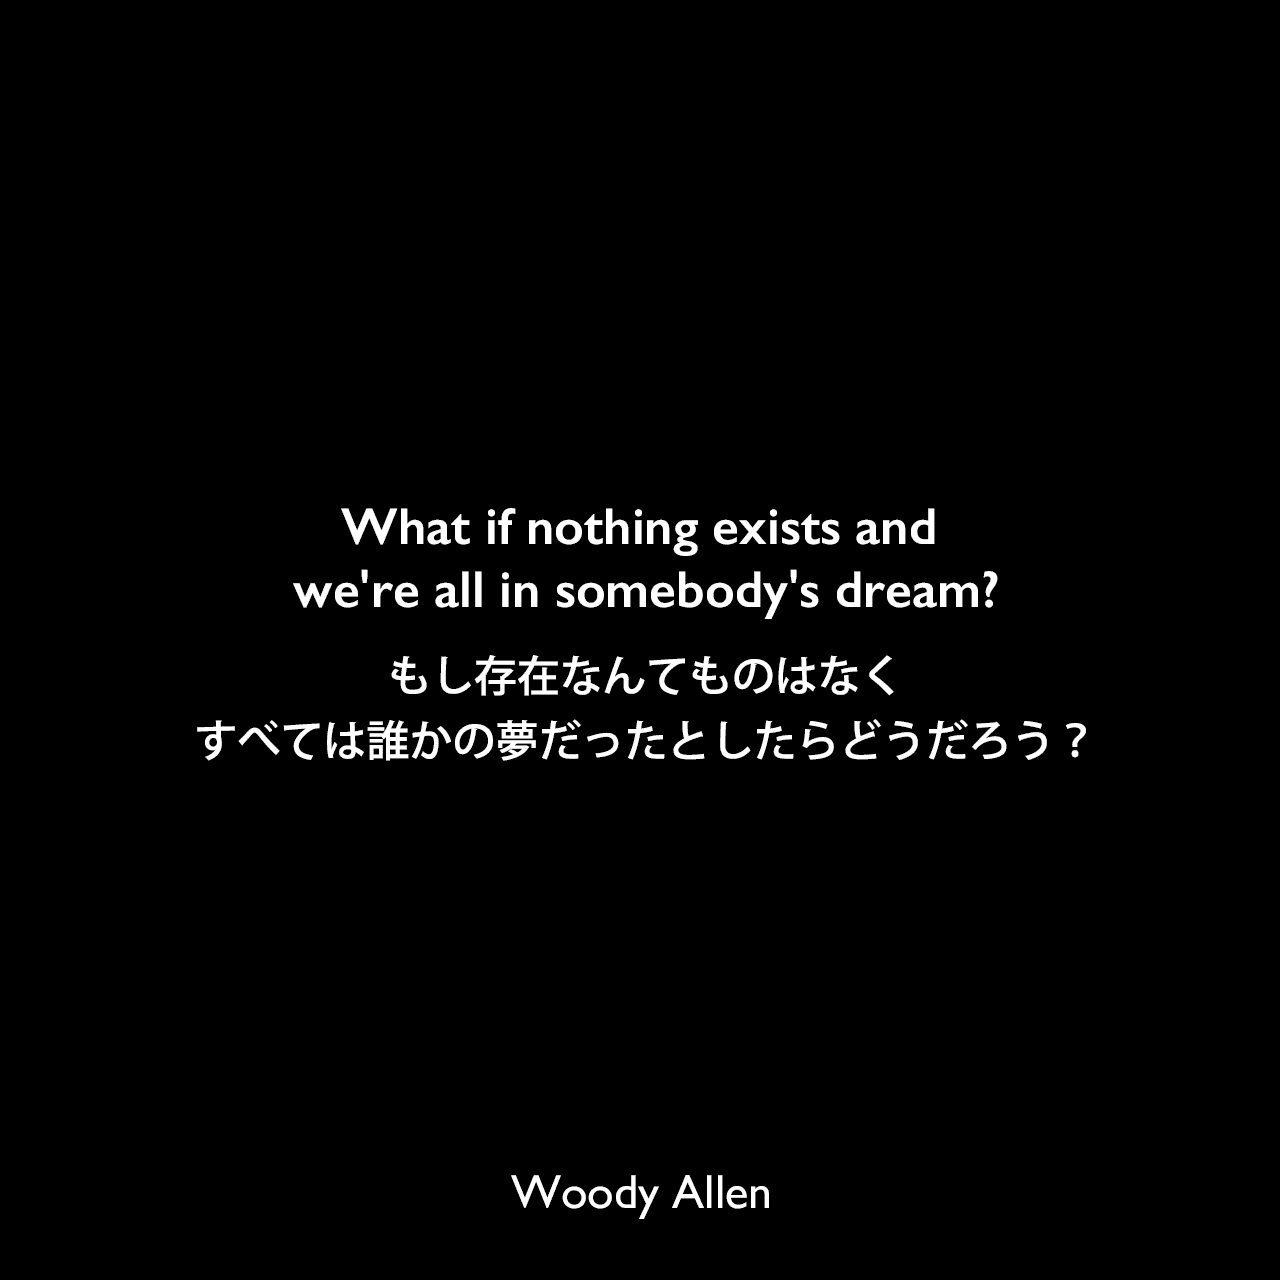 What if nothing exists and we're all in somebody's dream?もし存在なんてものはなく、すべては誰かの夢だったとしたらどうだろう？Woody Allen